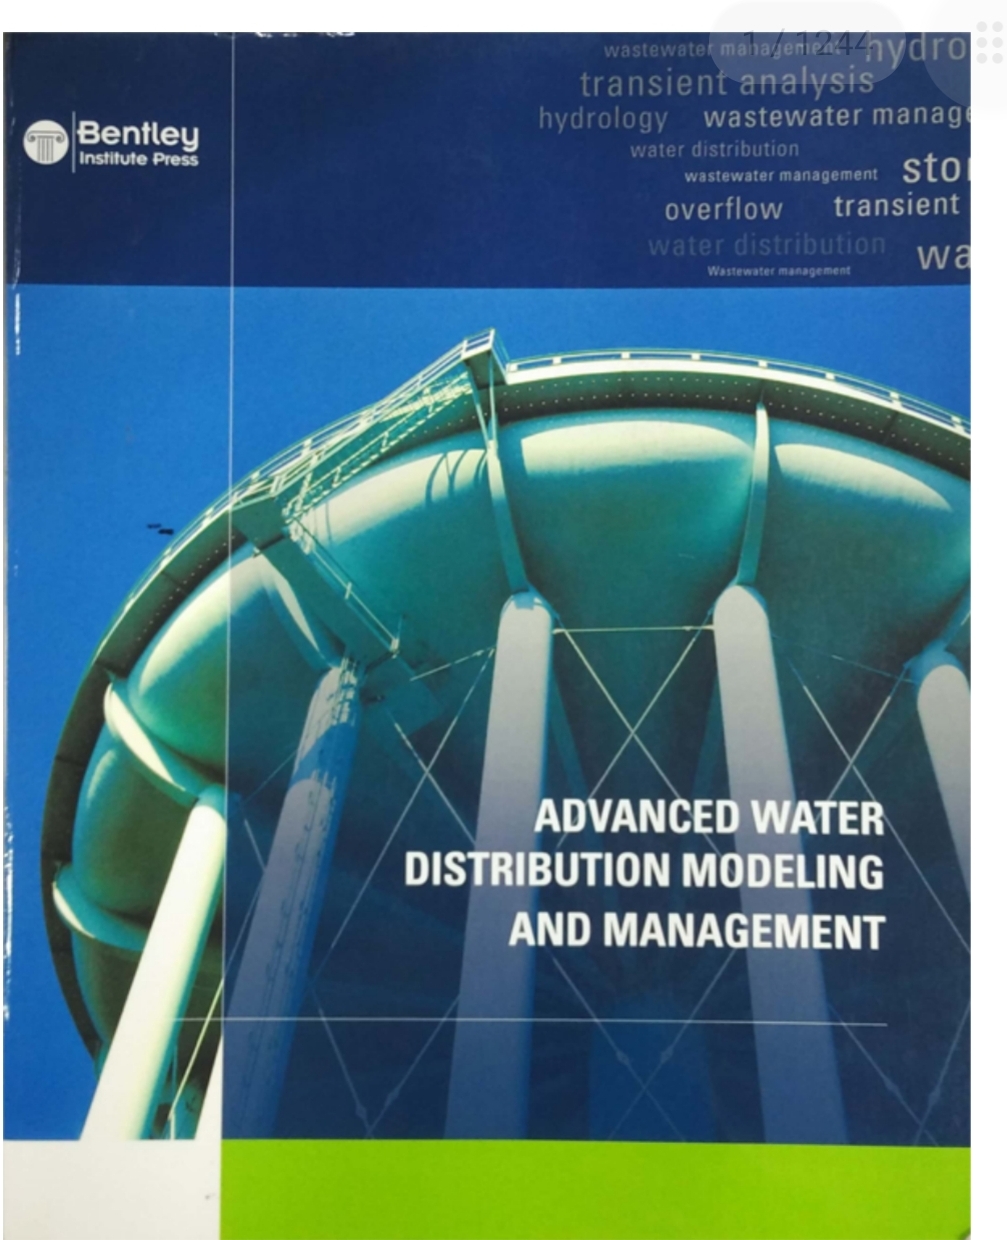 ADVANCED WATER DISTRIBUTION MODELING AND MANAGEMENT